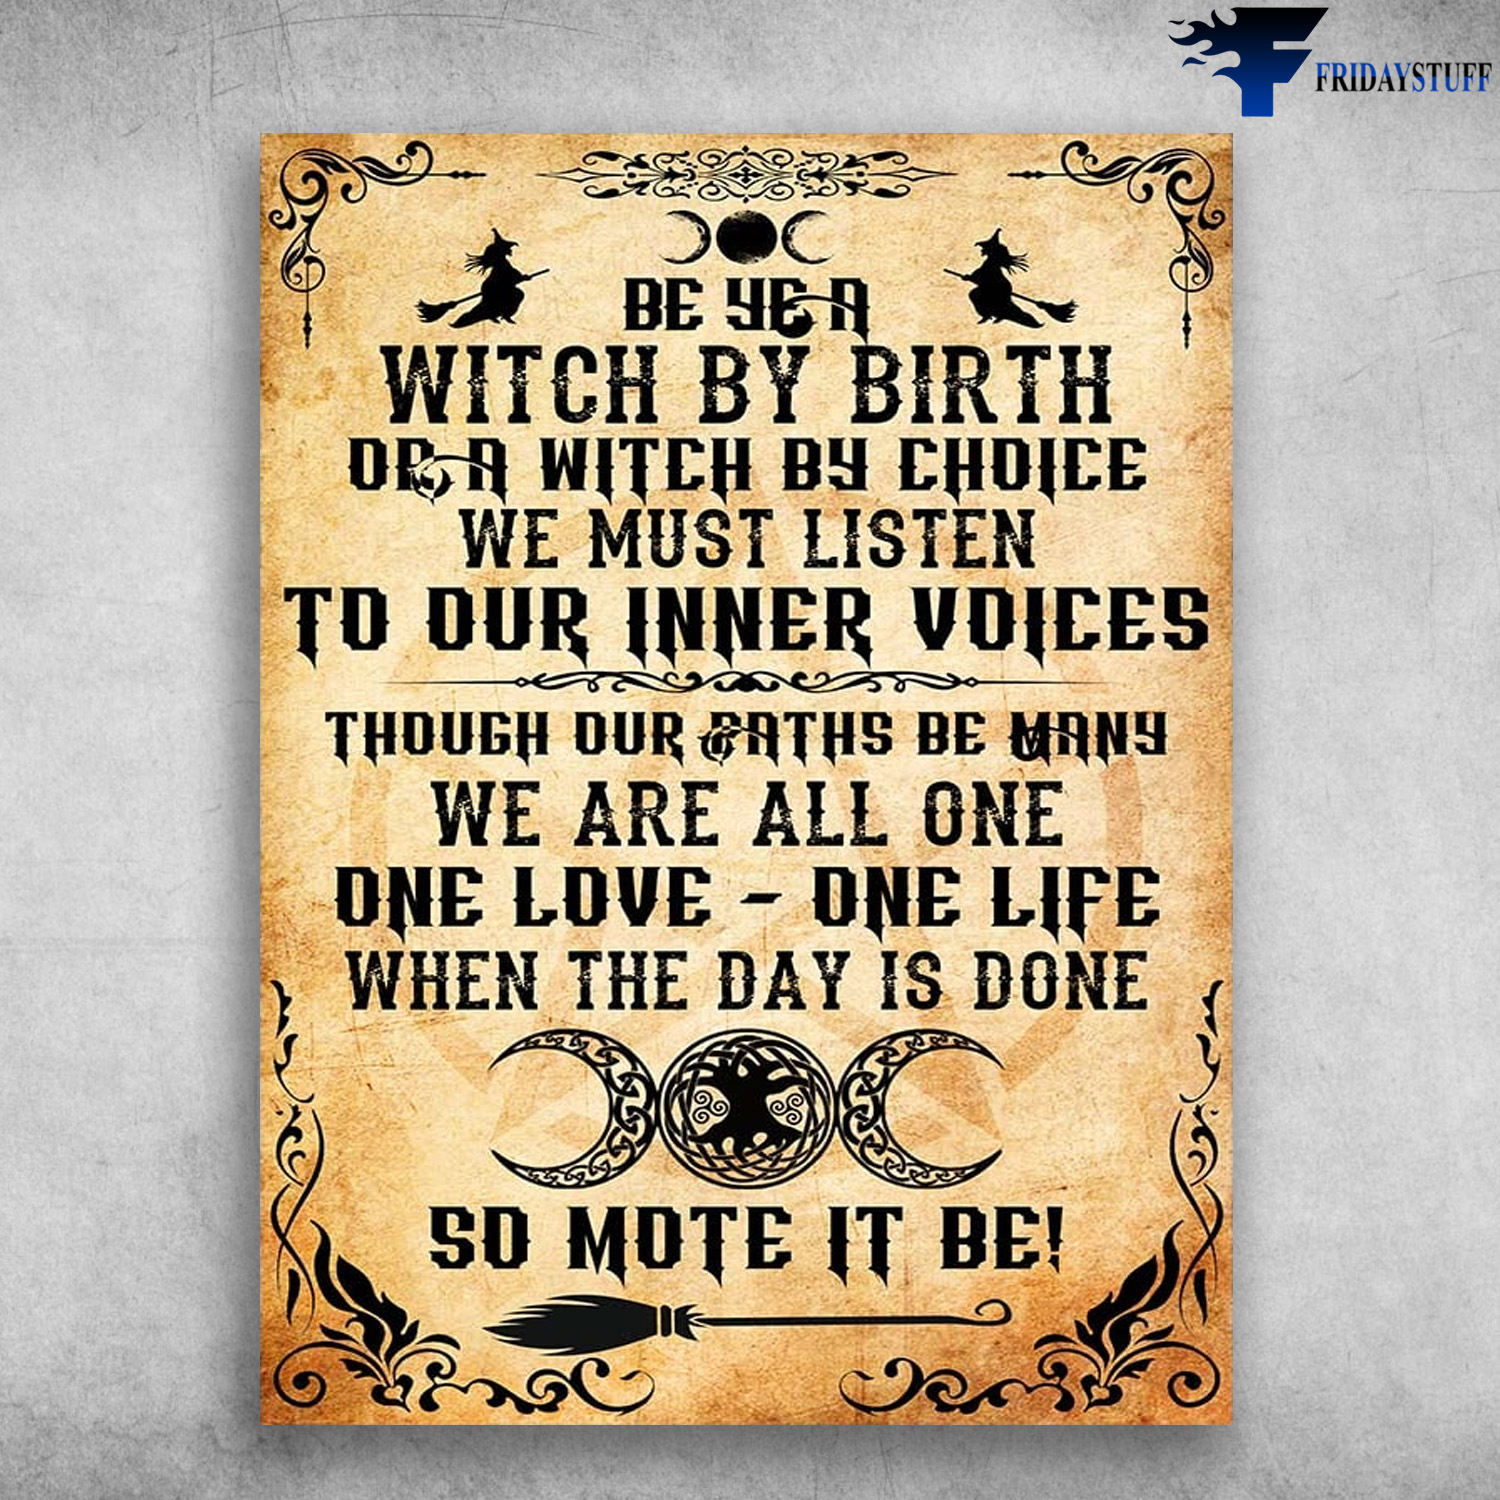 Halloween Poster, Witch Broomstick - Be Ye A Witch By Birth, Or A Witch By Choice, We Must Listen To Our Inner Voices, Though Our Paths Be Many, We Are All One, One Love, One Life